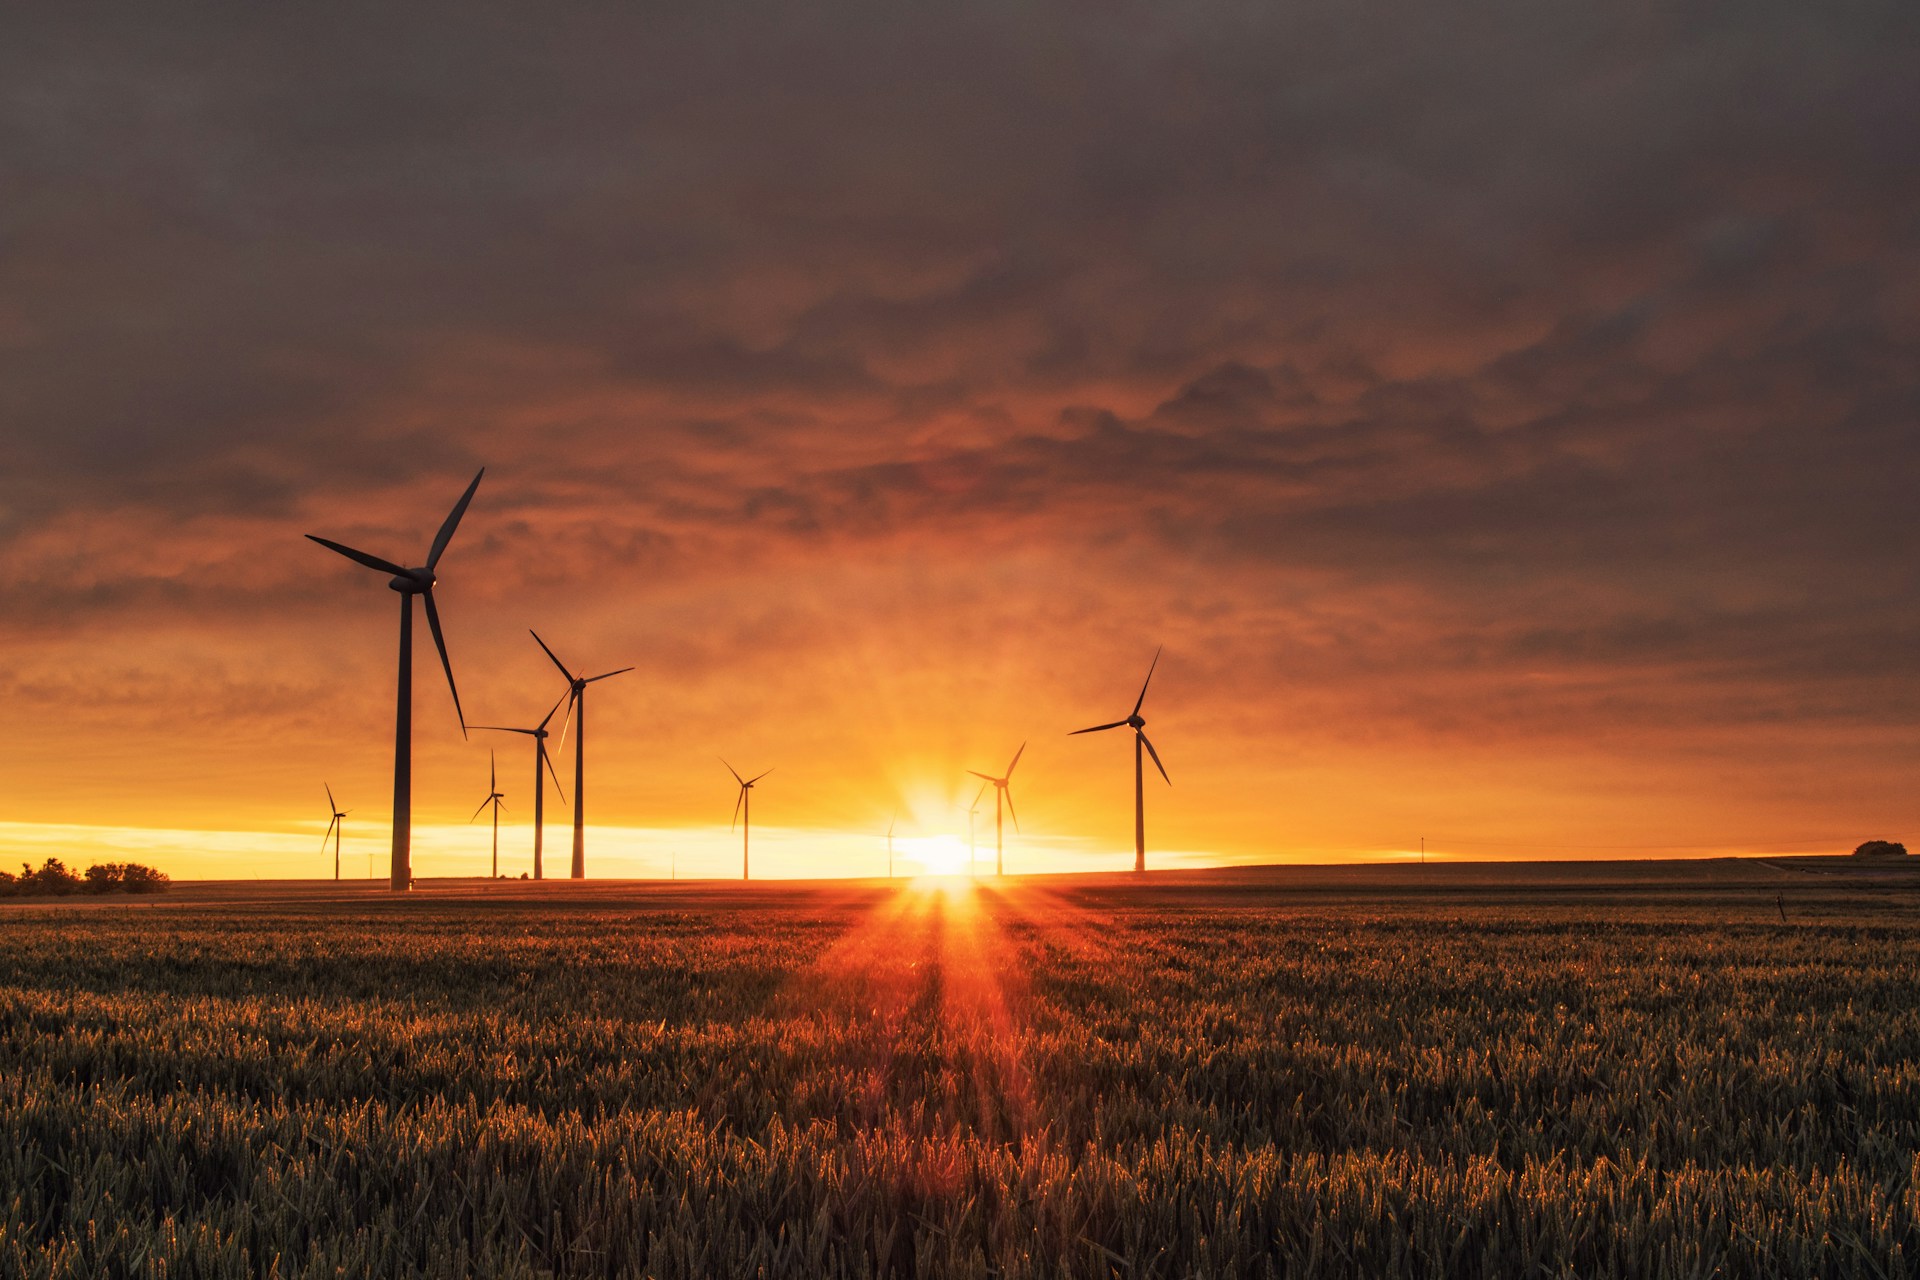 Scientists announce a 10-point plan for a global shift to 100% renewables by 2035.